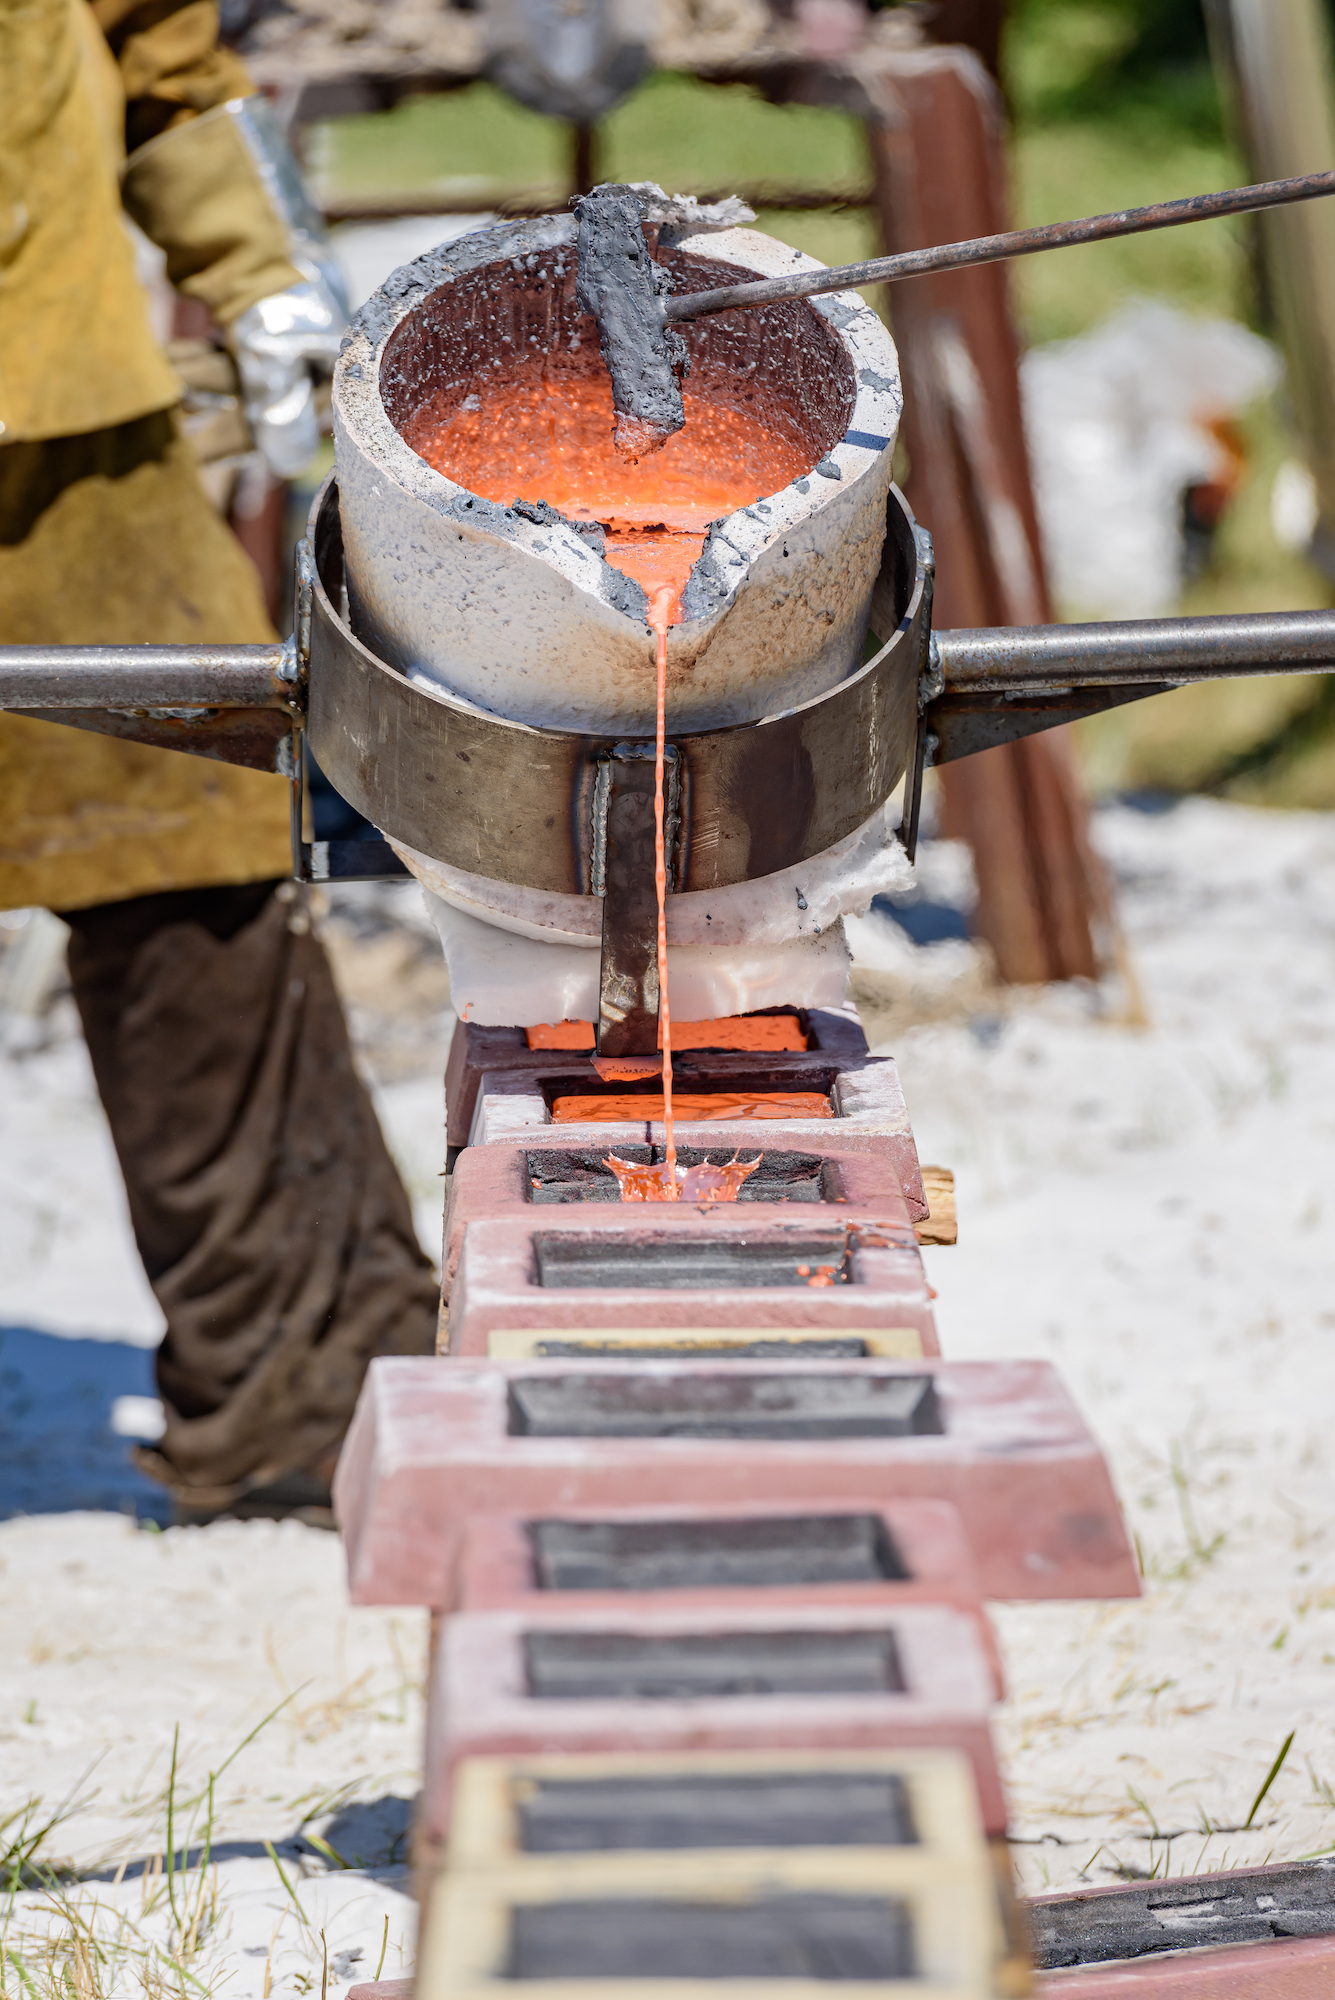 Molten iron is being poured down a line of molds